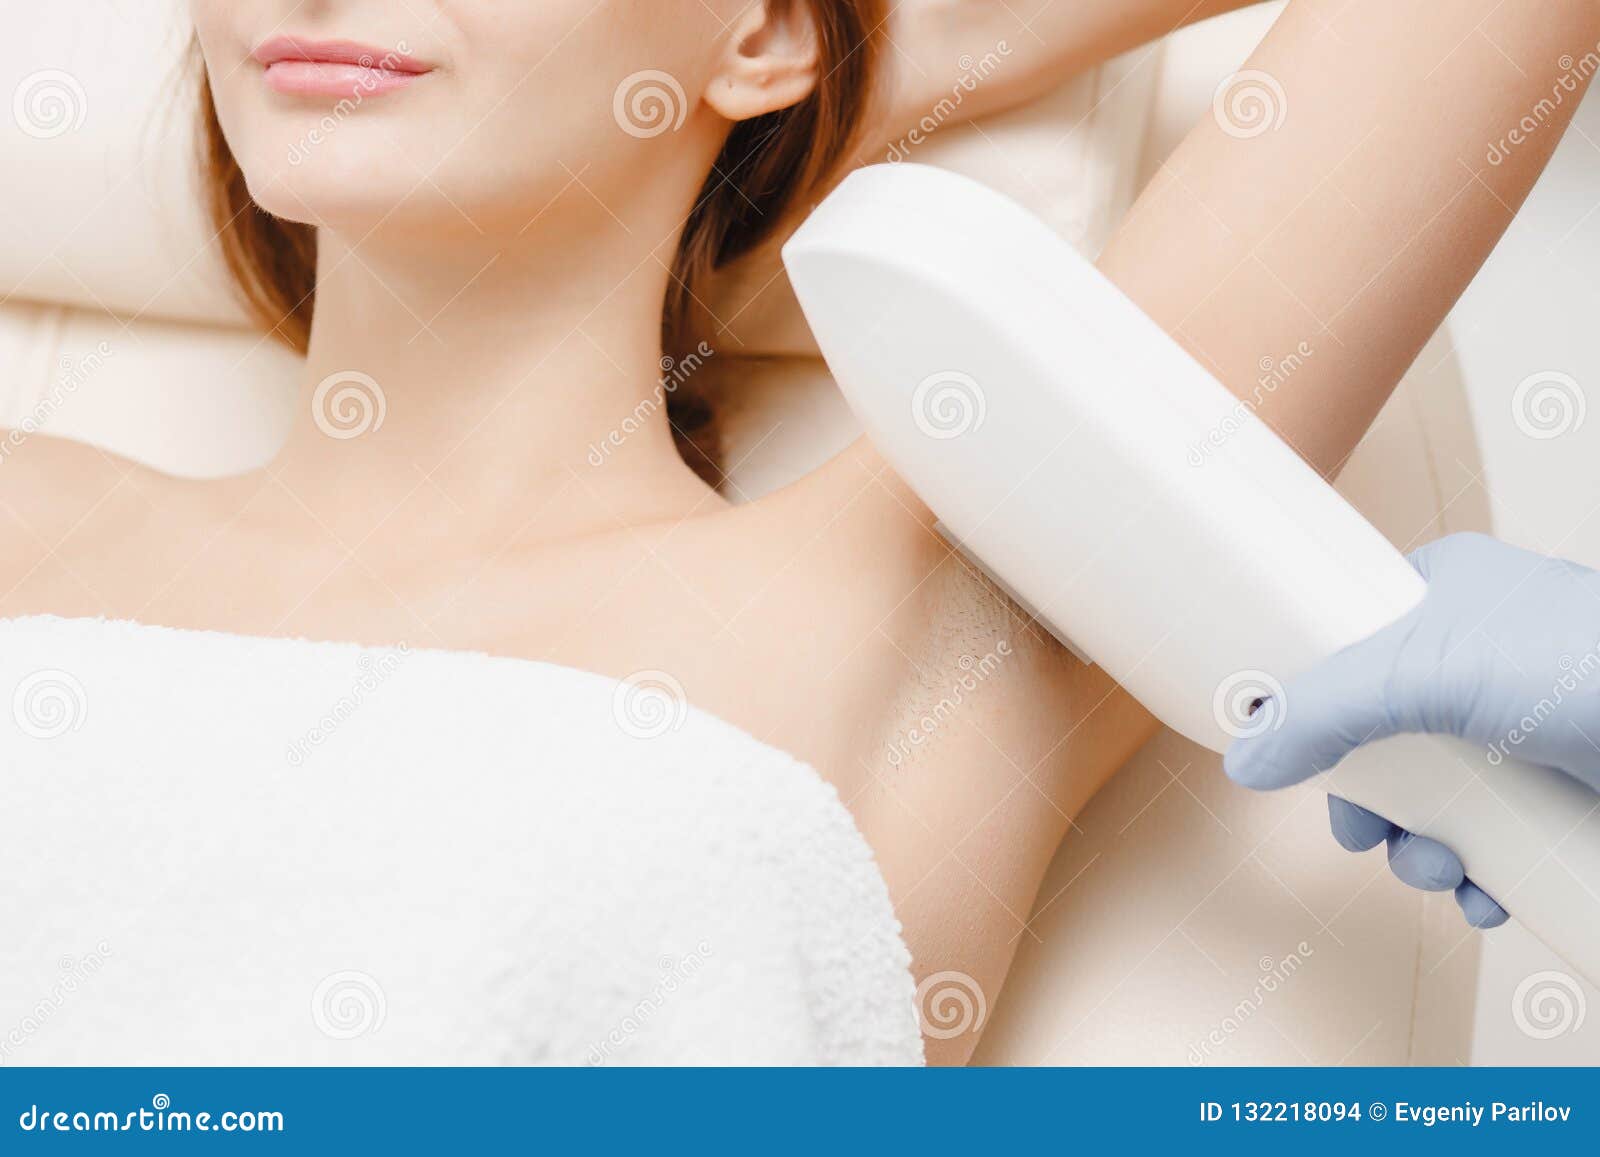 smooth skin woman under arms. laser hair removal